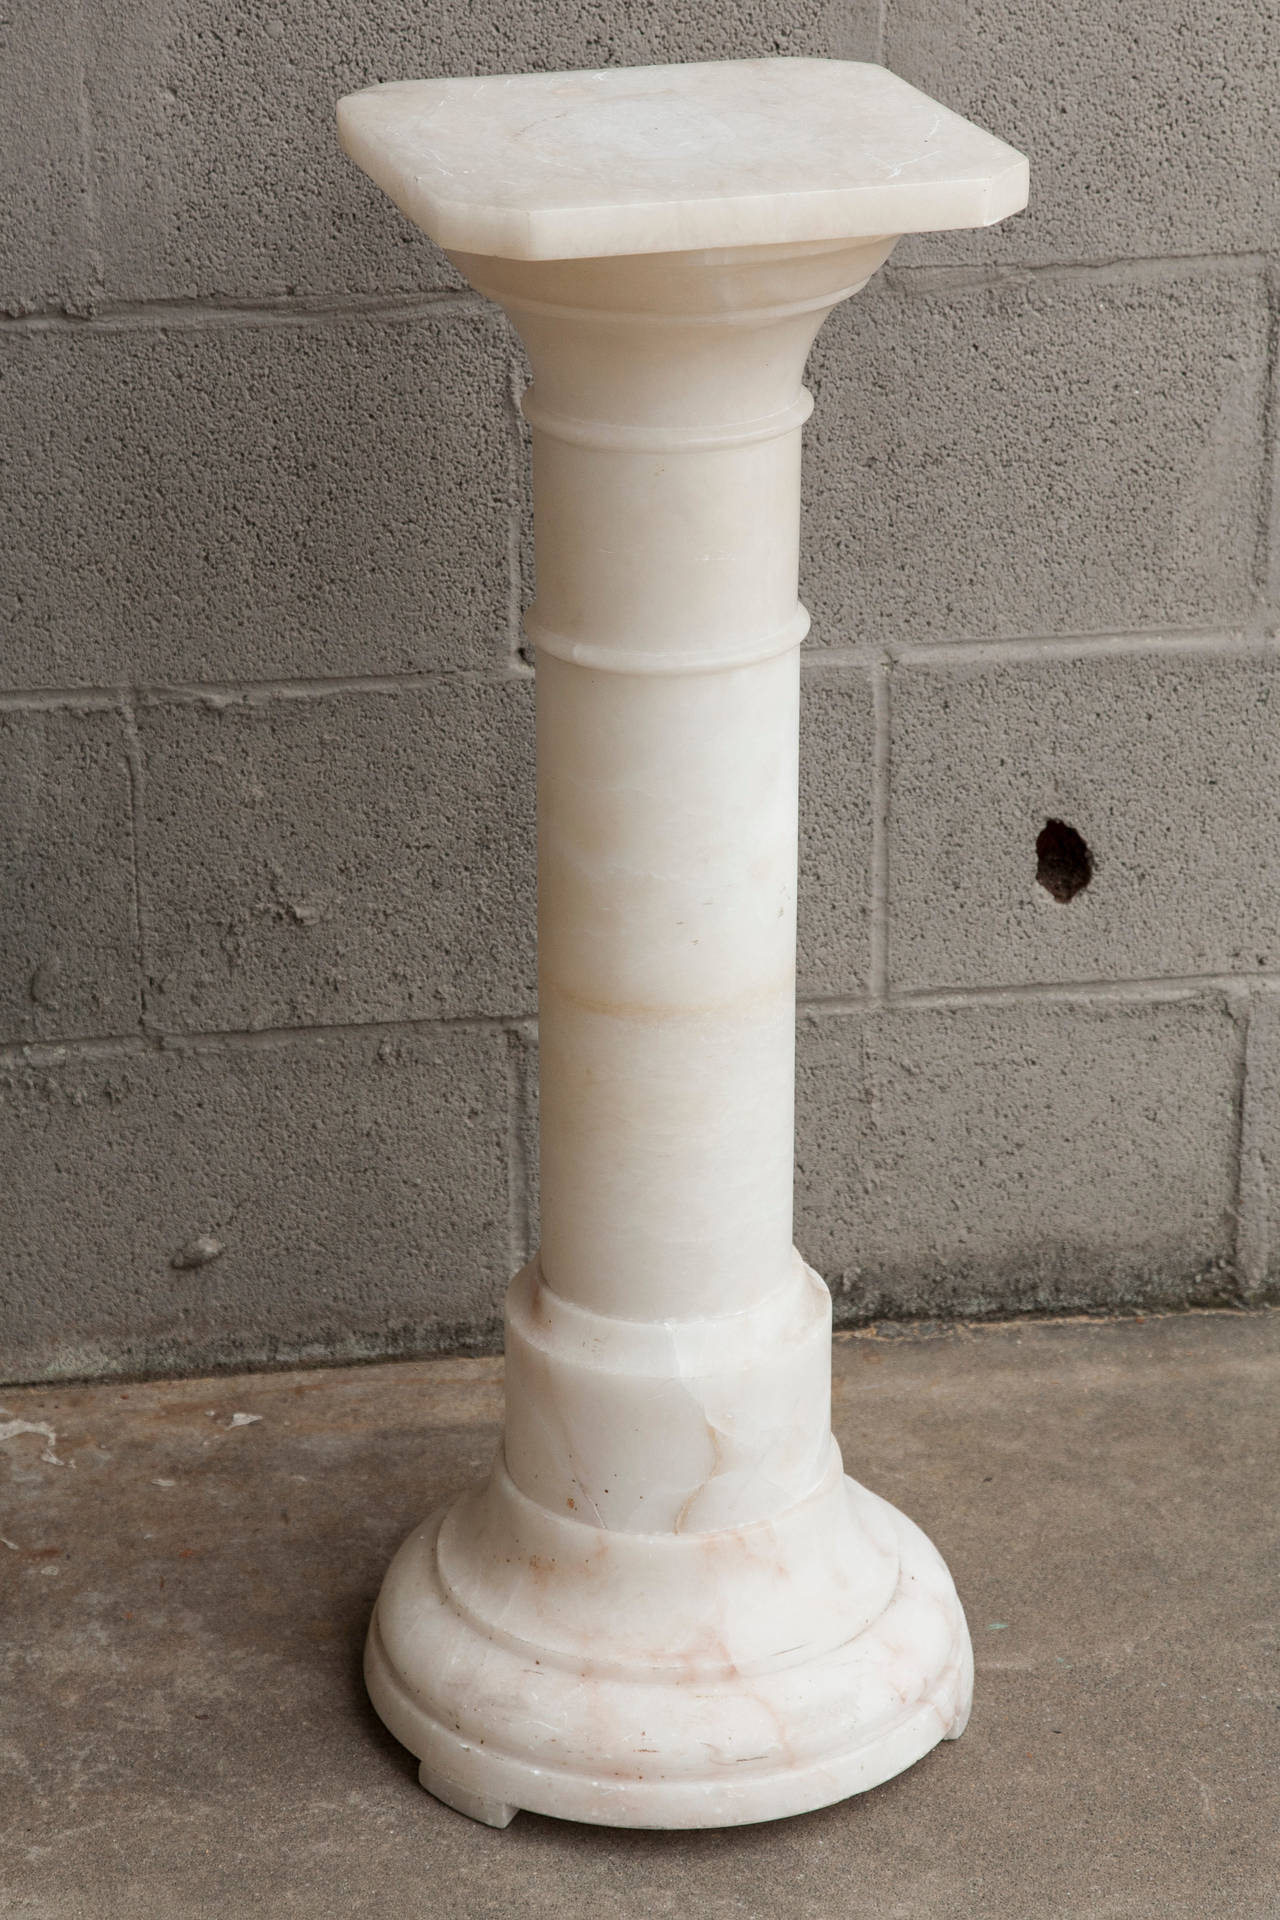 This elegant classical column, made of pure alabaster, will make a beautiful display stand for a sculpture or plant.